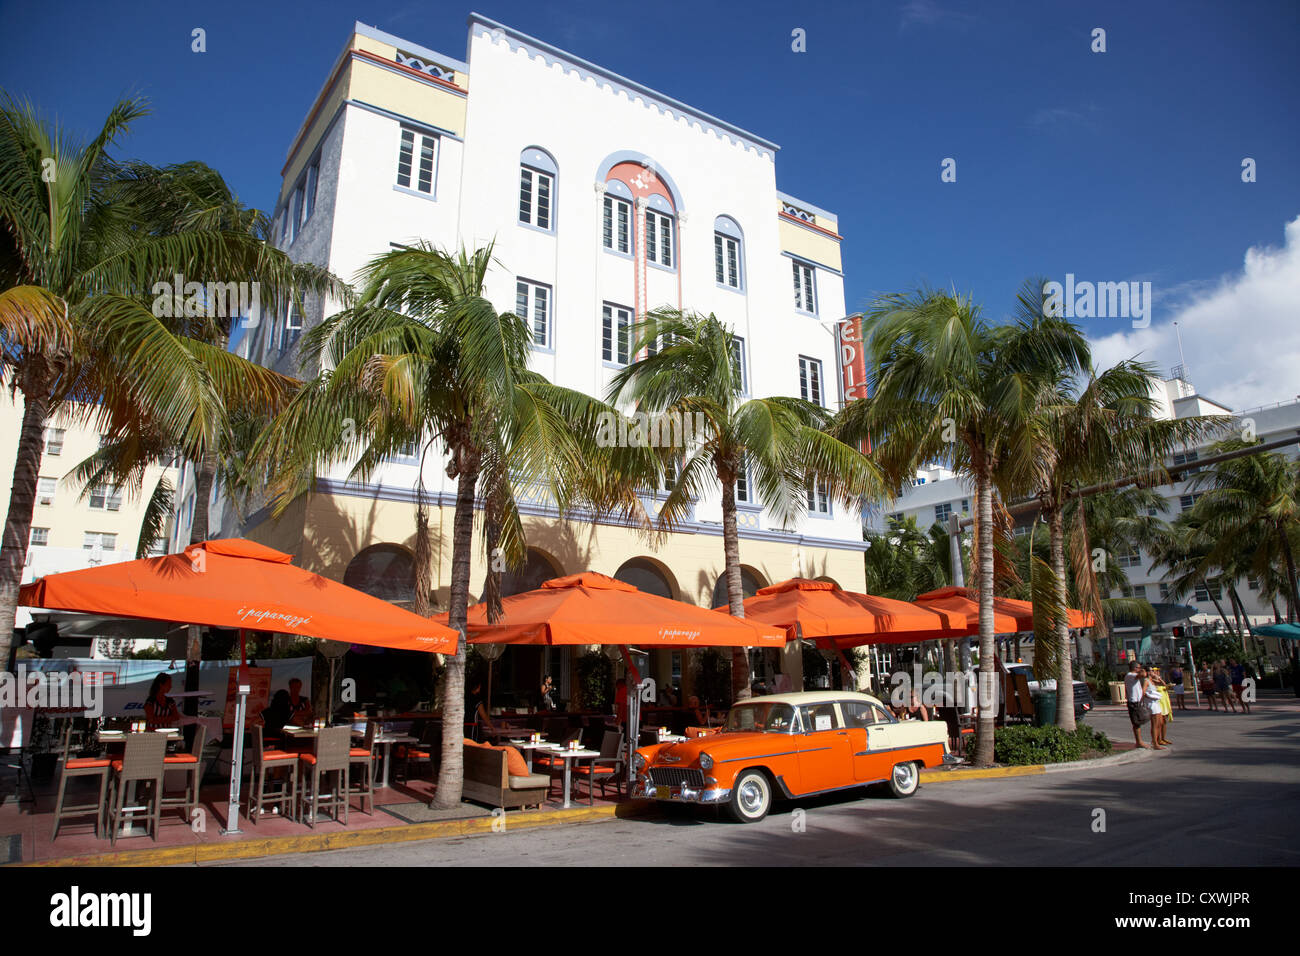 orange chevrolet bel air in the cuban style outside the edison hotel ocean drive in the art deco district of miami south beach Stock Photo